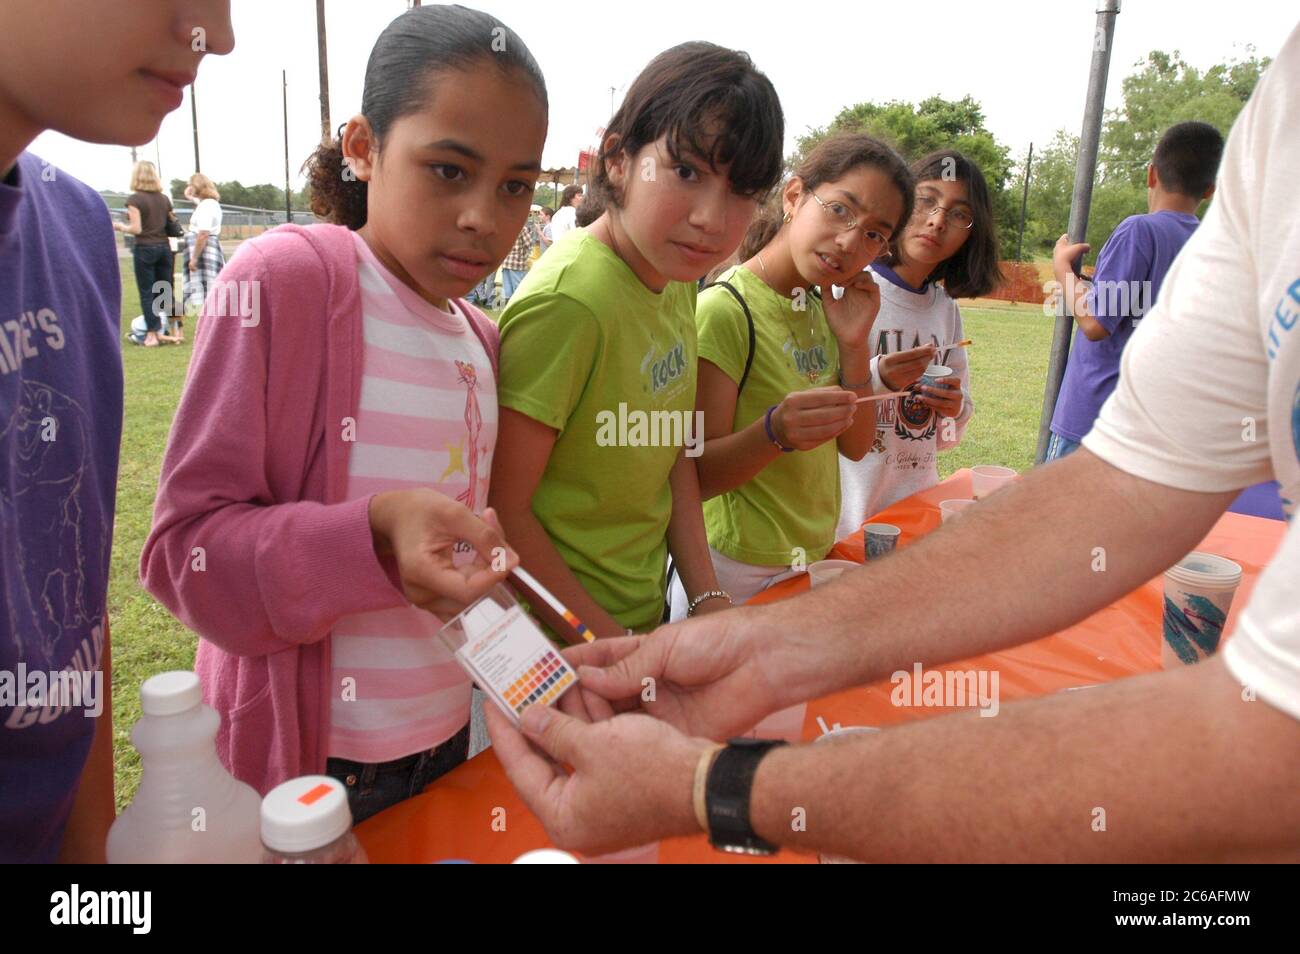 Austin Texas USA, April, 2004: Middle school students 6th and 7th grade learn about water and wastewater issues at City of Austin-sponsored Blue Thumb outdoor science event. Hispanic students test the pH of various liquids by using litmus paper. ©Bob Daemmrich Stock Photo